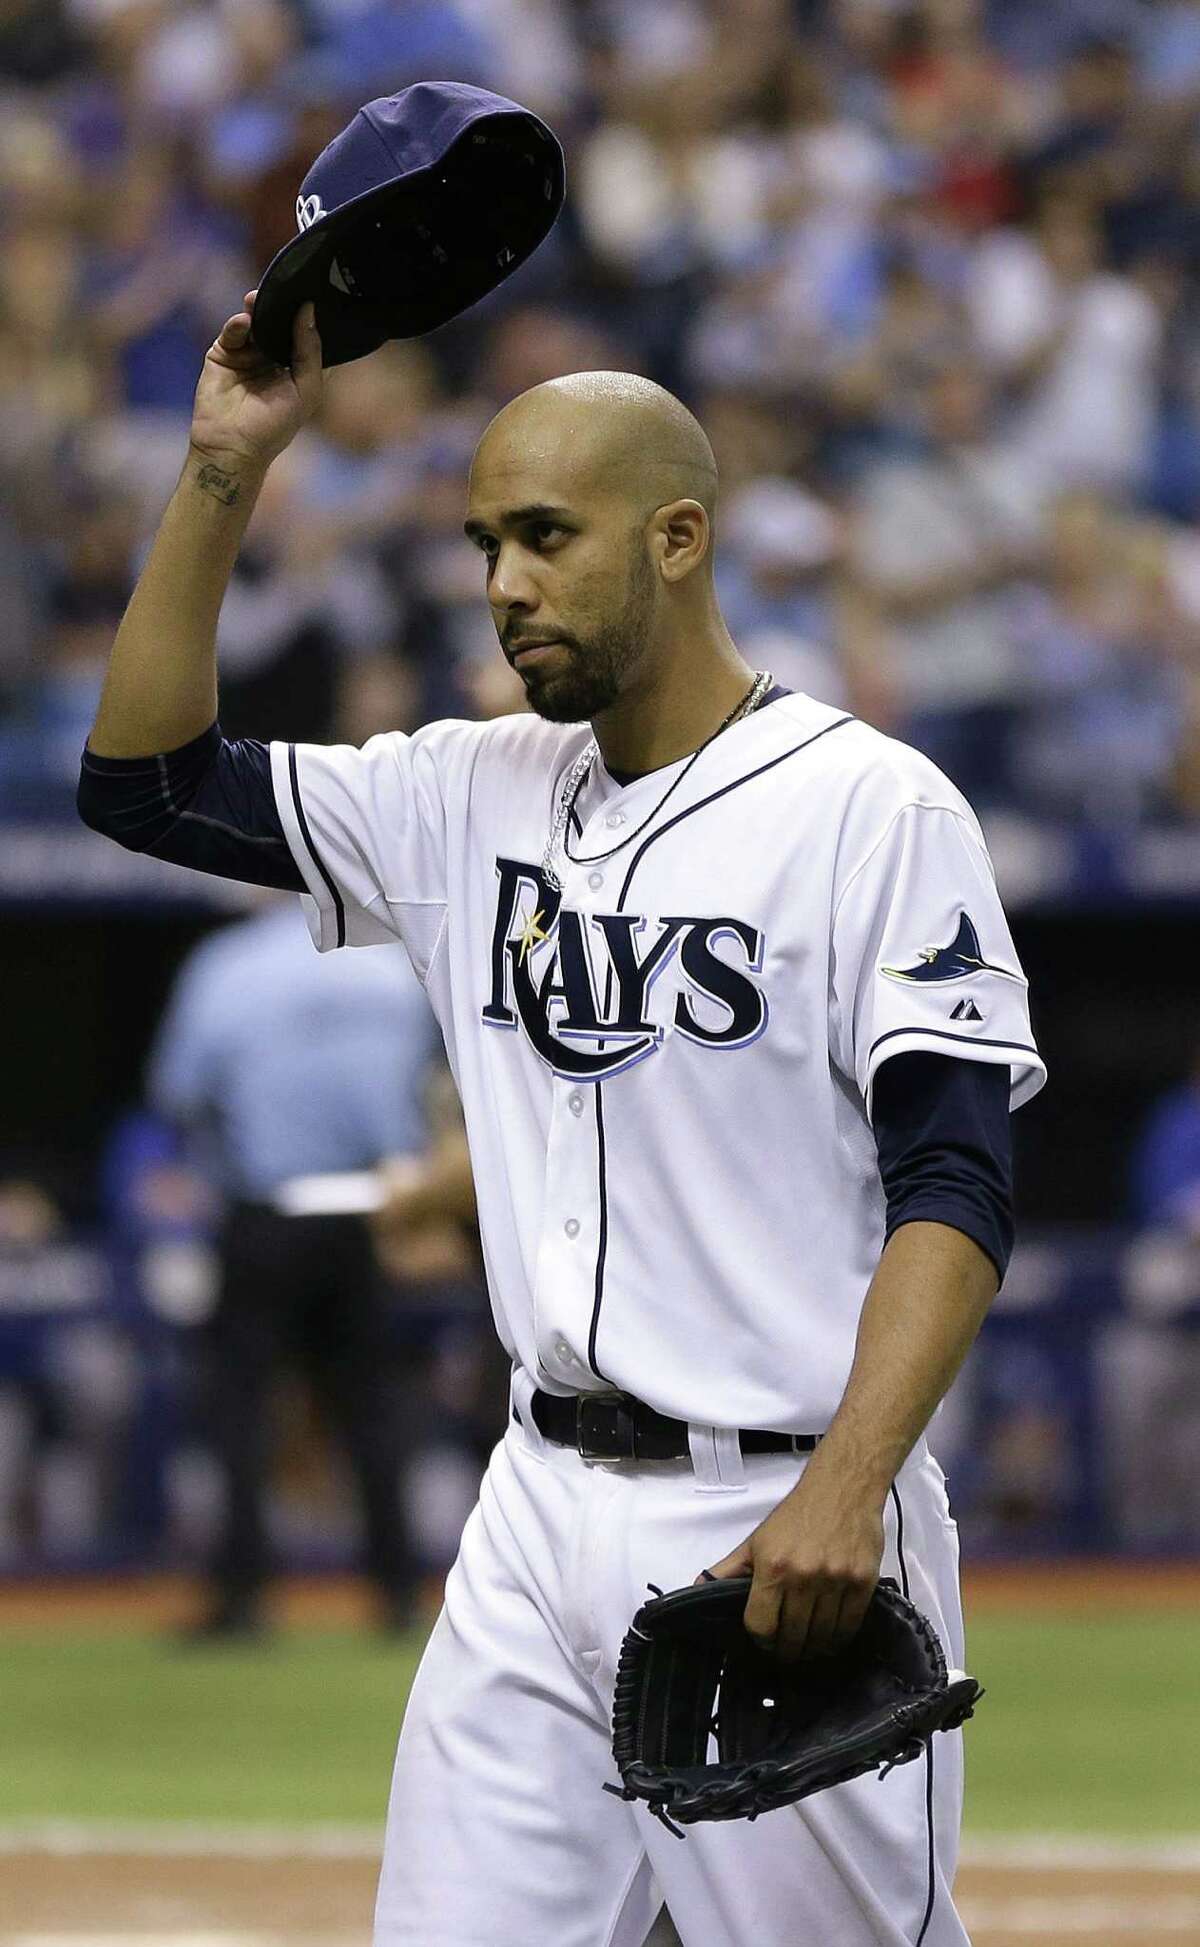 Tampa Bay ace David Price, the 2012 AL Cy Young Award winner, struck out six in 72/3 innings.